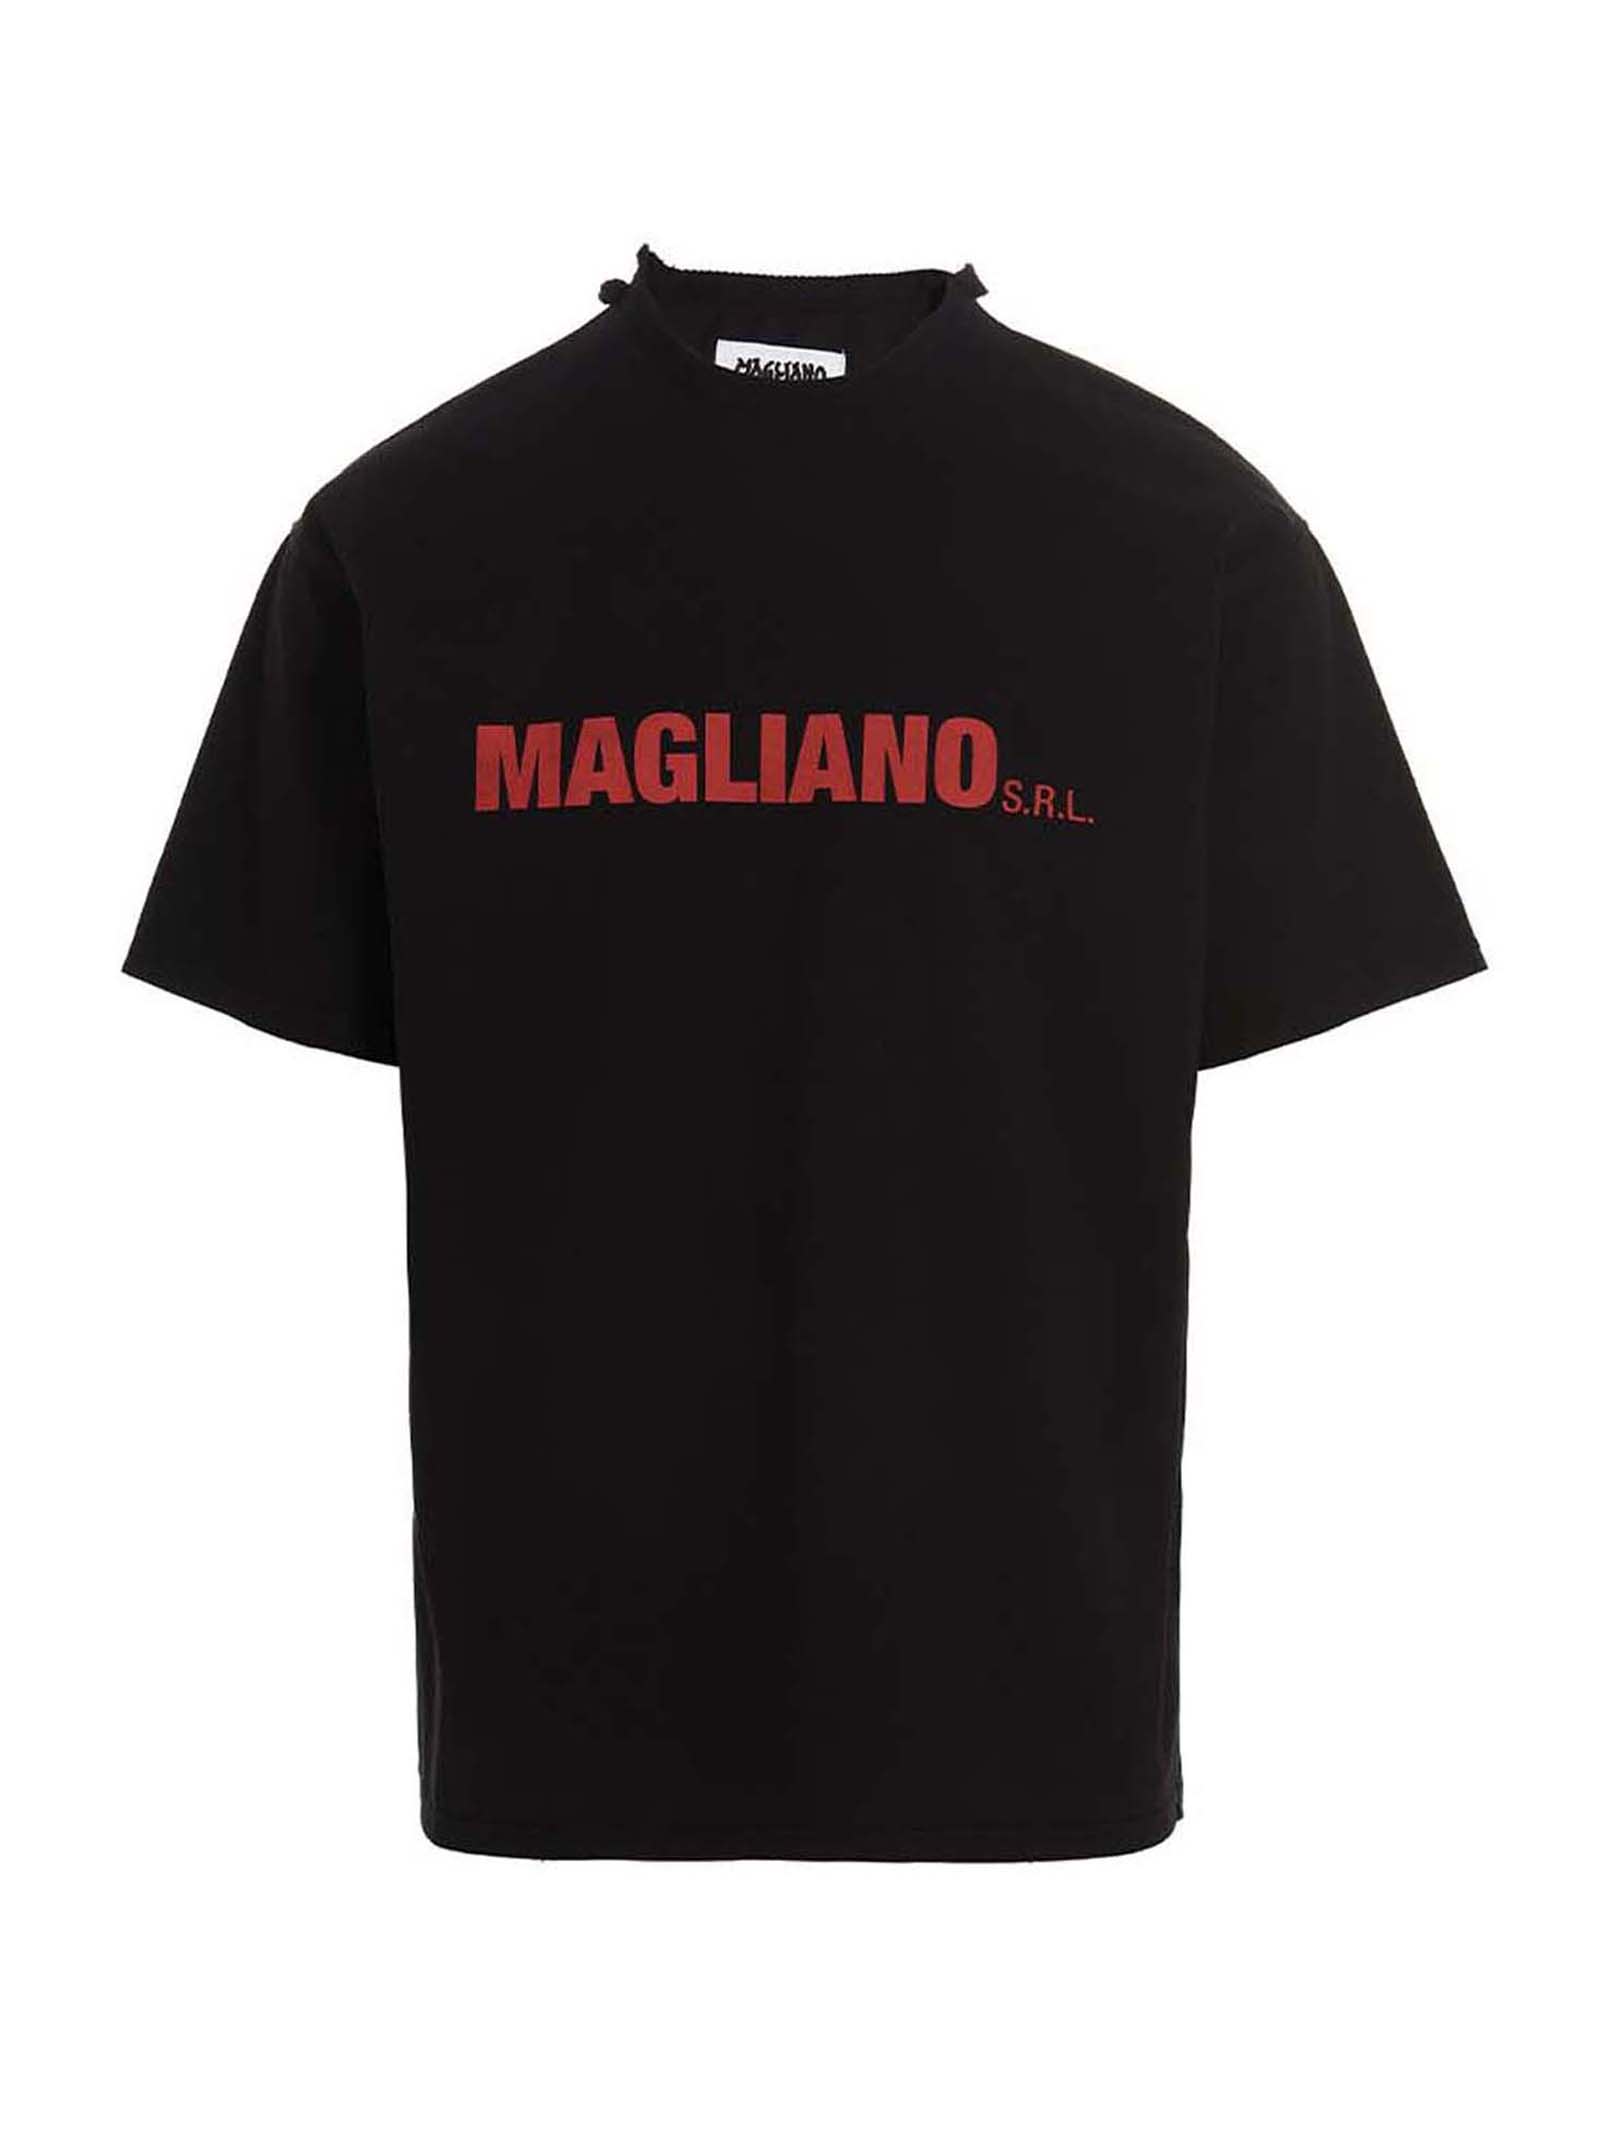 MAGLIANO Clothing for Men | ModeSens